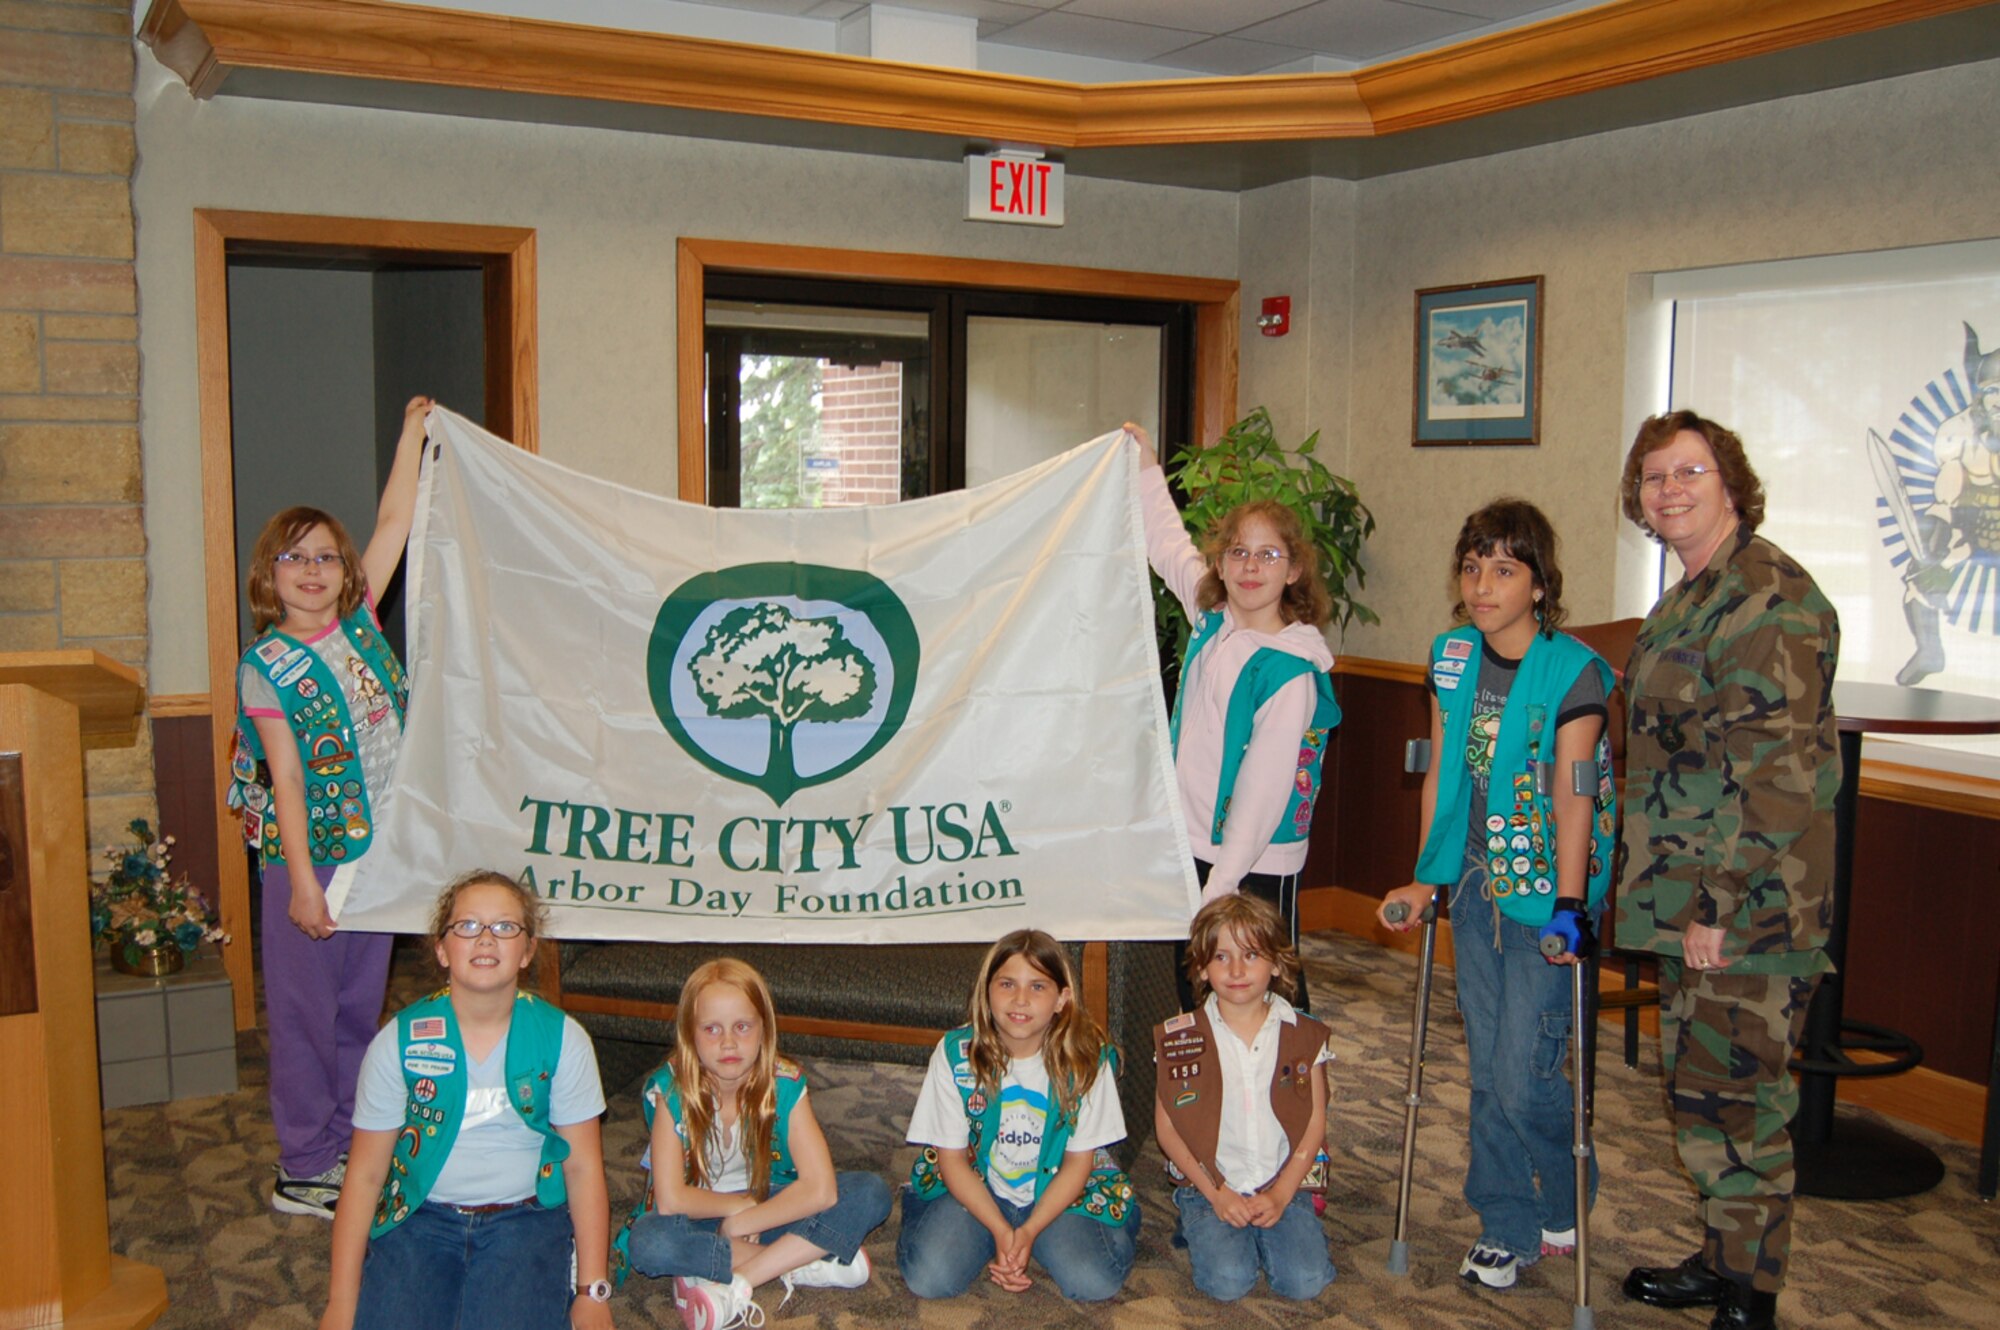 Grand Forks Air Force base was presented with the Tree City USA for North Dakota from the Arbor Day Foundation during a ceremony May 22. Local groups such as the Girl Scouts volunteer to plant trees keeping the base part of Tree City USA each year. (U.S. Air Force photo/Airman 1st Class Ashley Coomes)